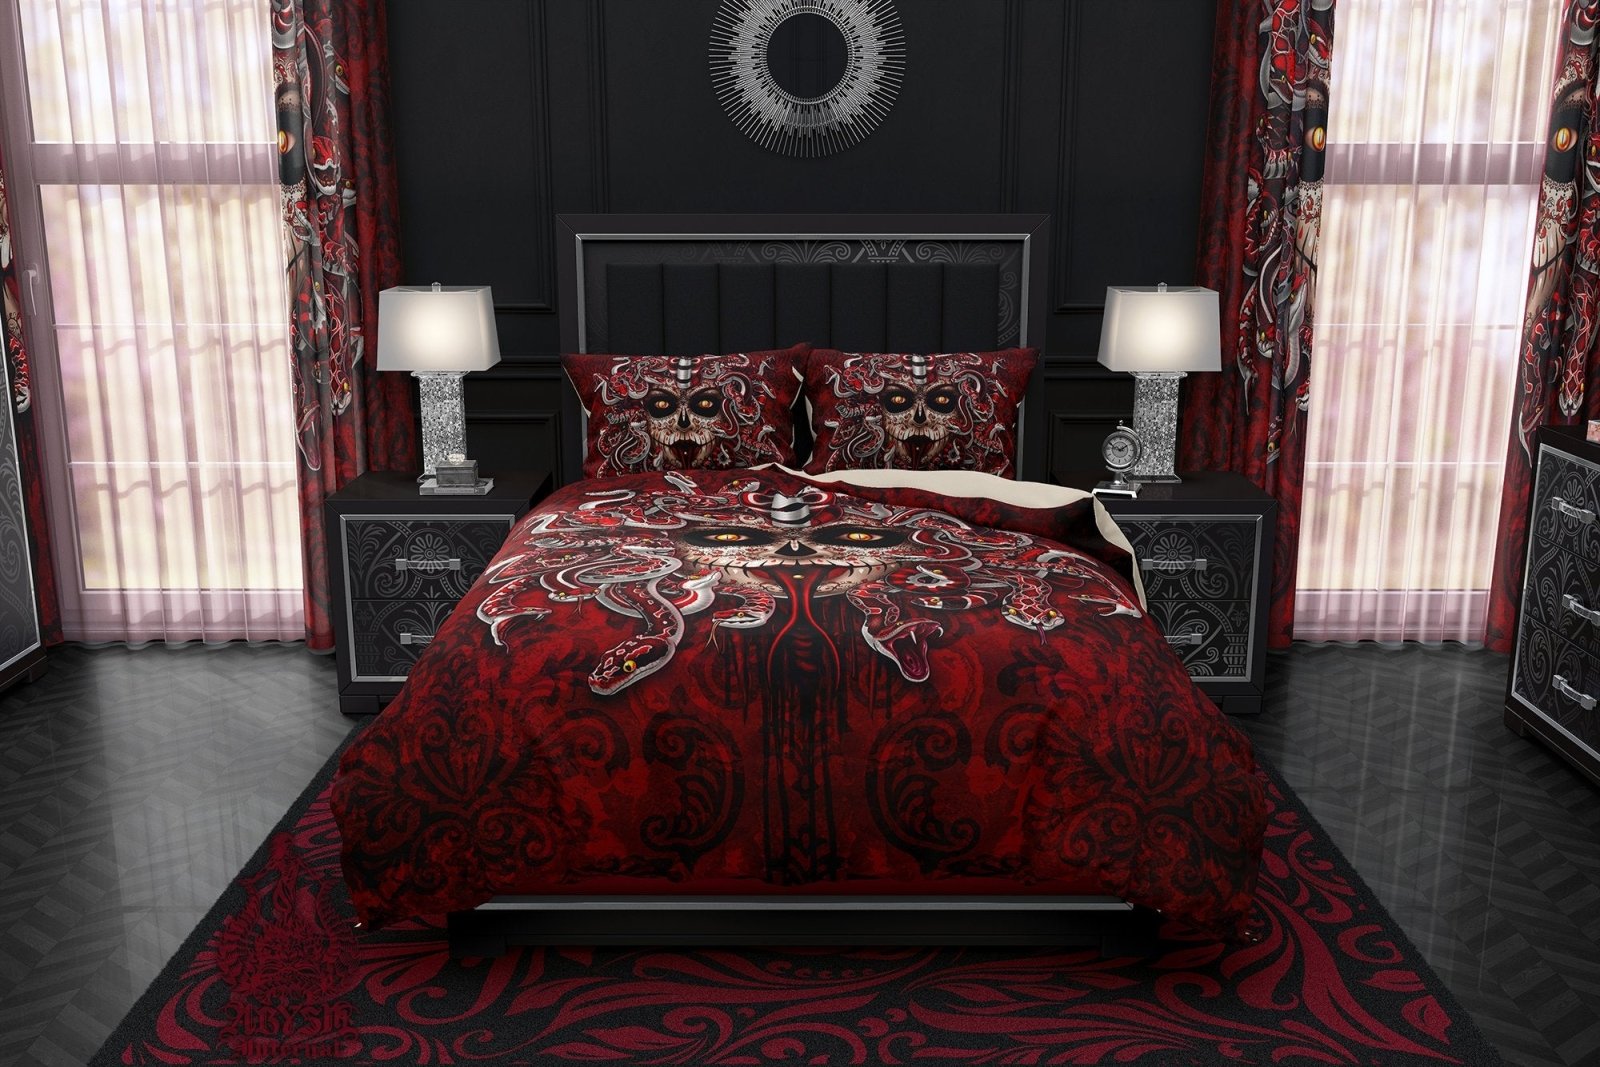 Catrina Bedding Set, Comforter and Duvet, Medusa, Gothic Dia de los Muertos, Goth Bed Cover and Bedroom Decor, King, Queen and Twin Size - Day of the Dead - Abysm Internal